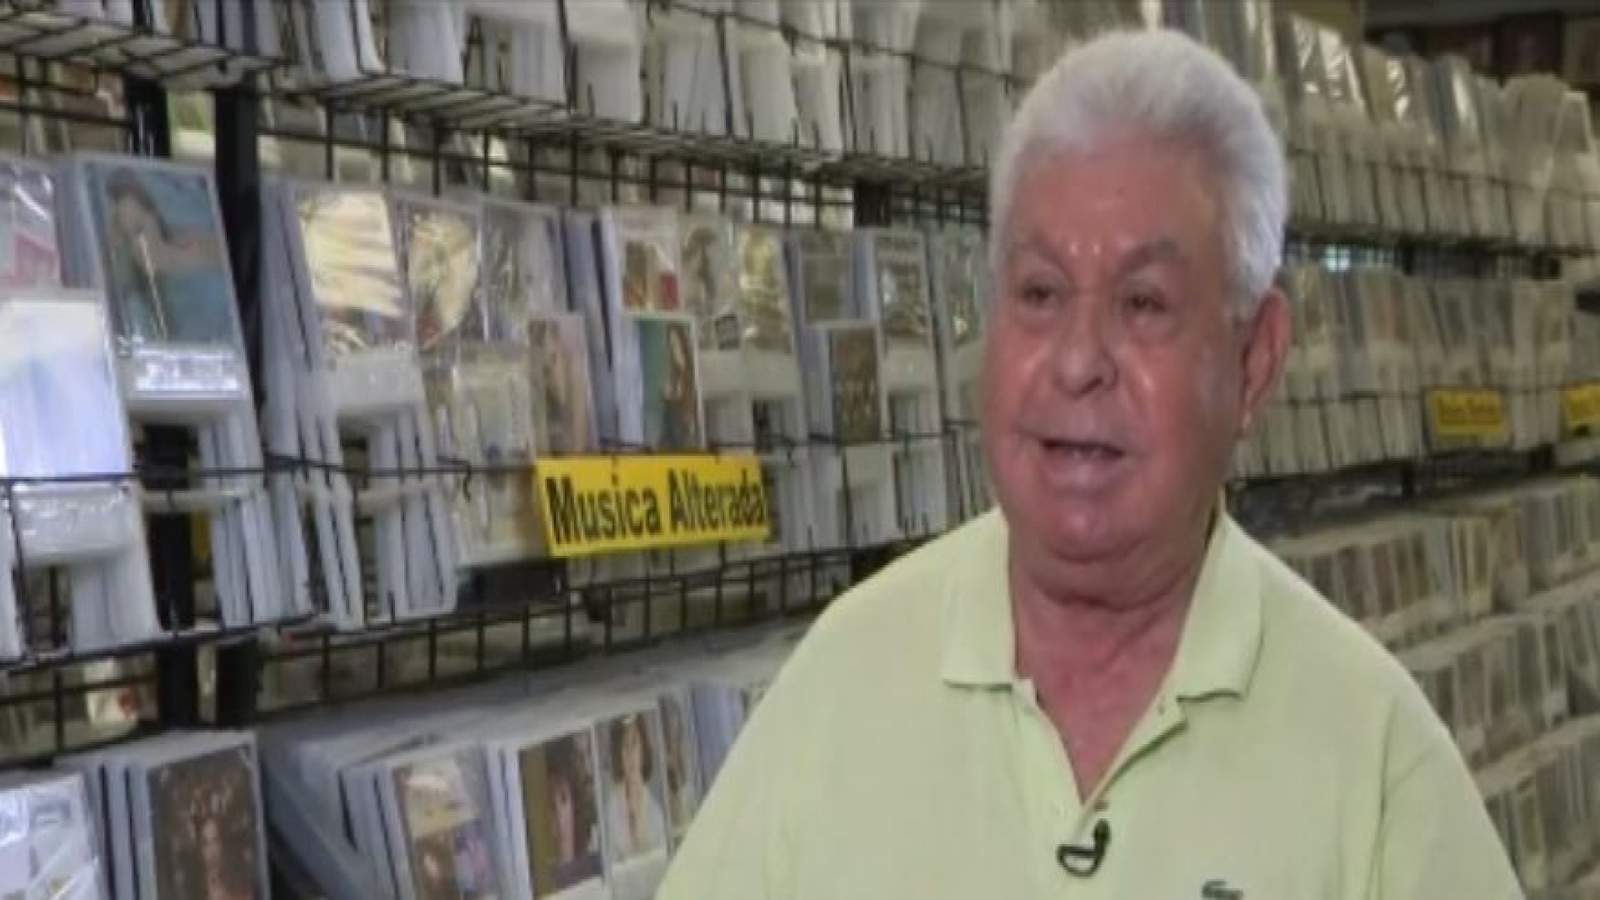 Voices of Houston: Memo’s Record Shop in East End celebrates Latin music for more than 50 years